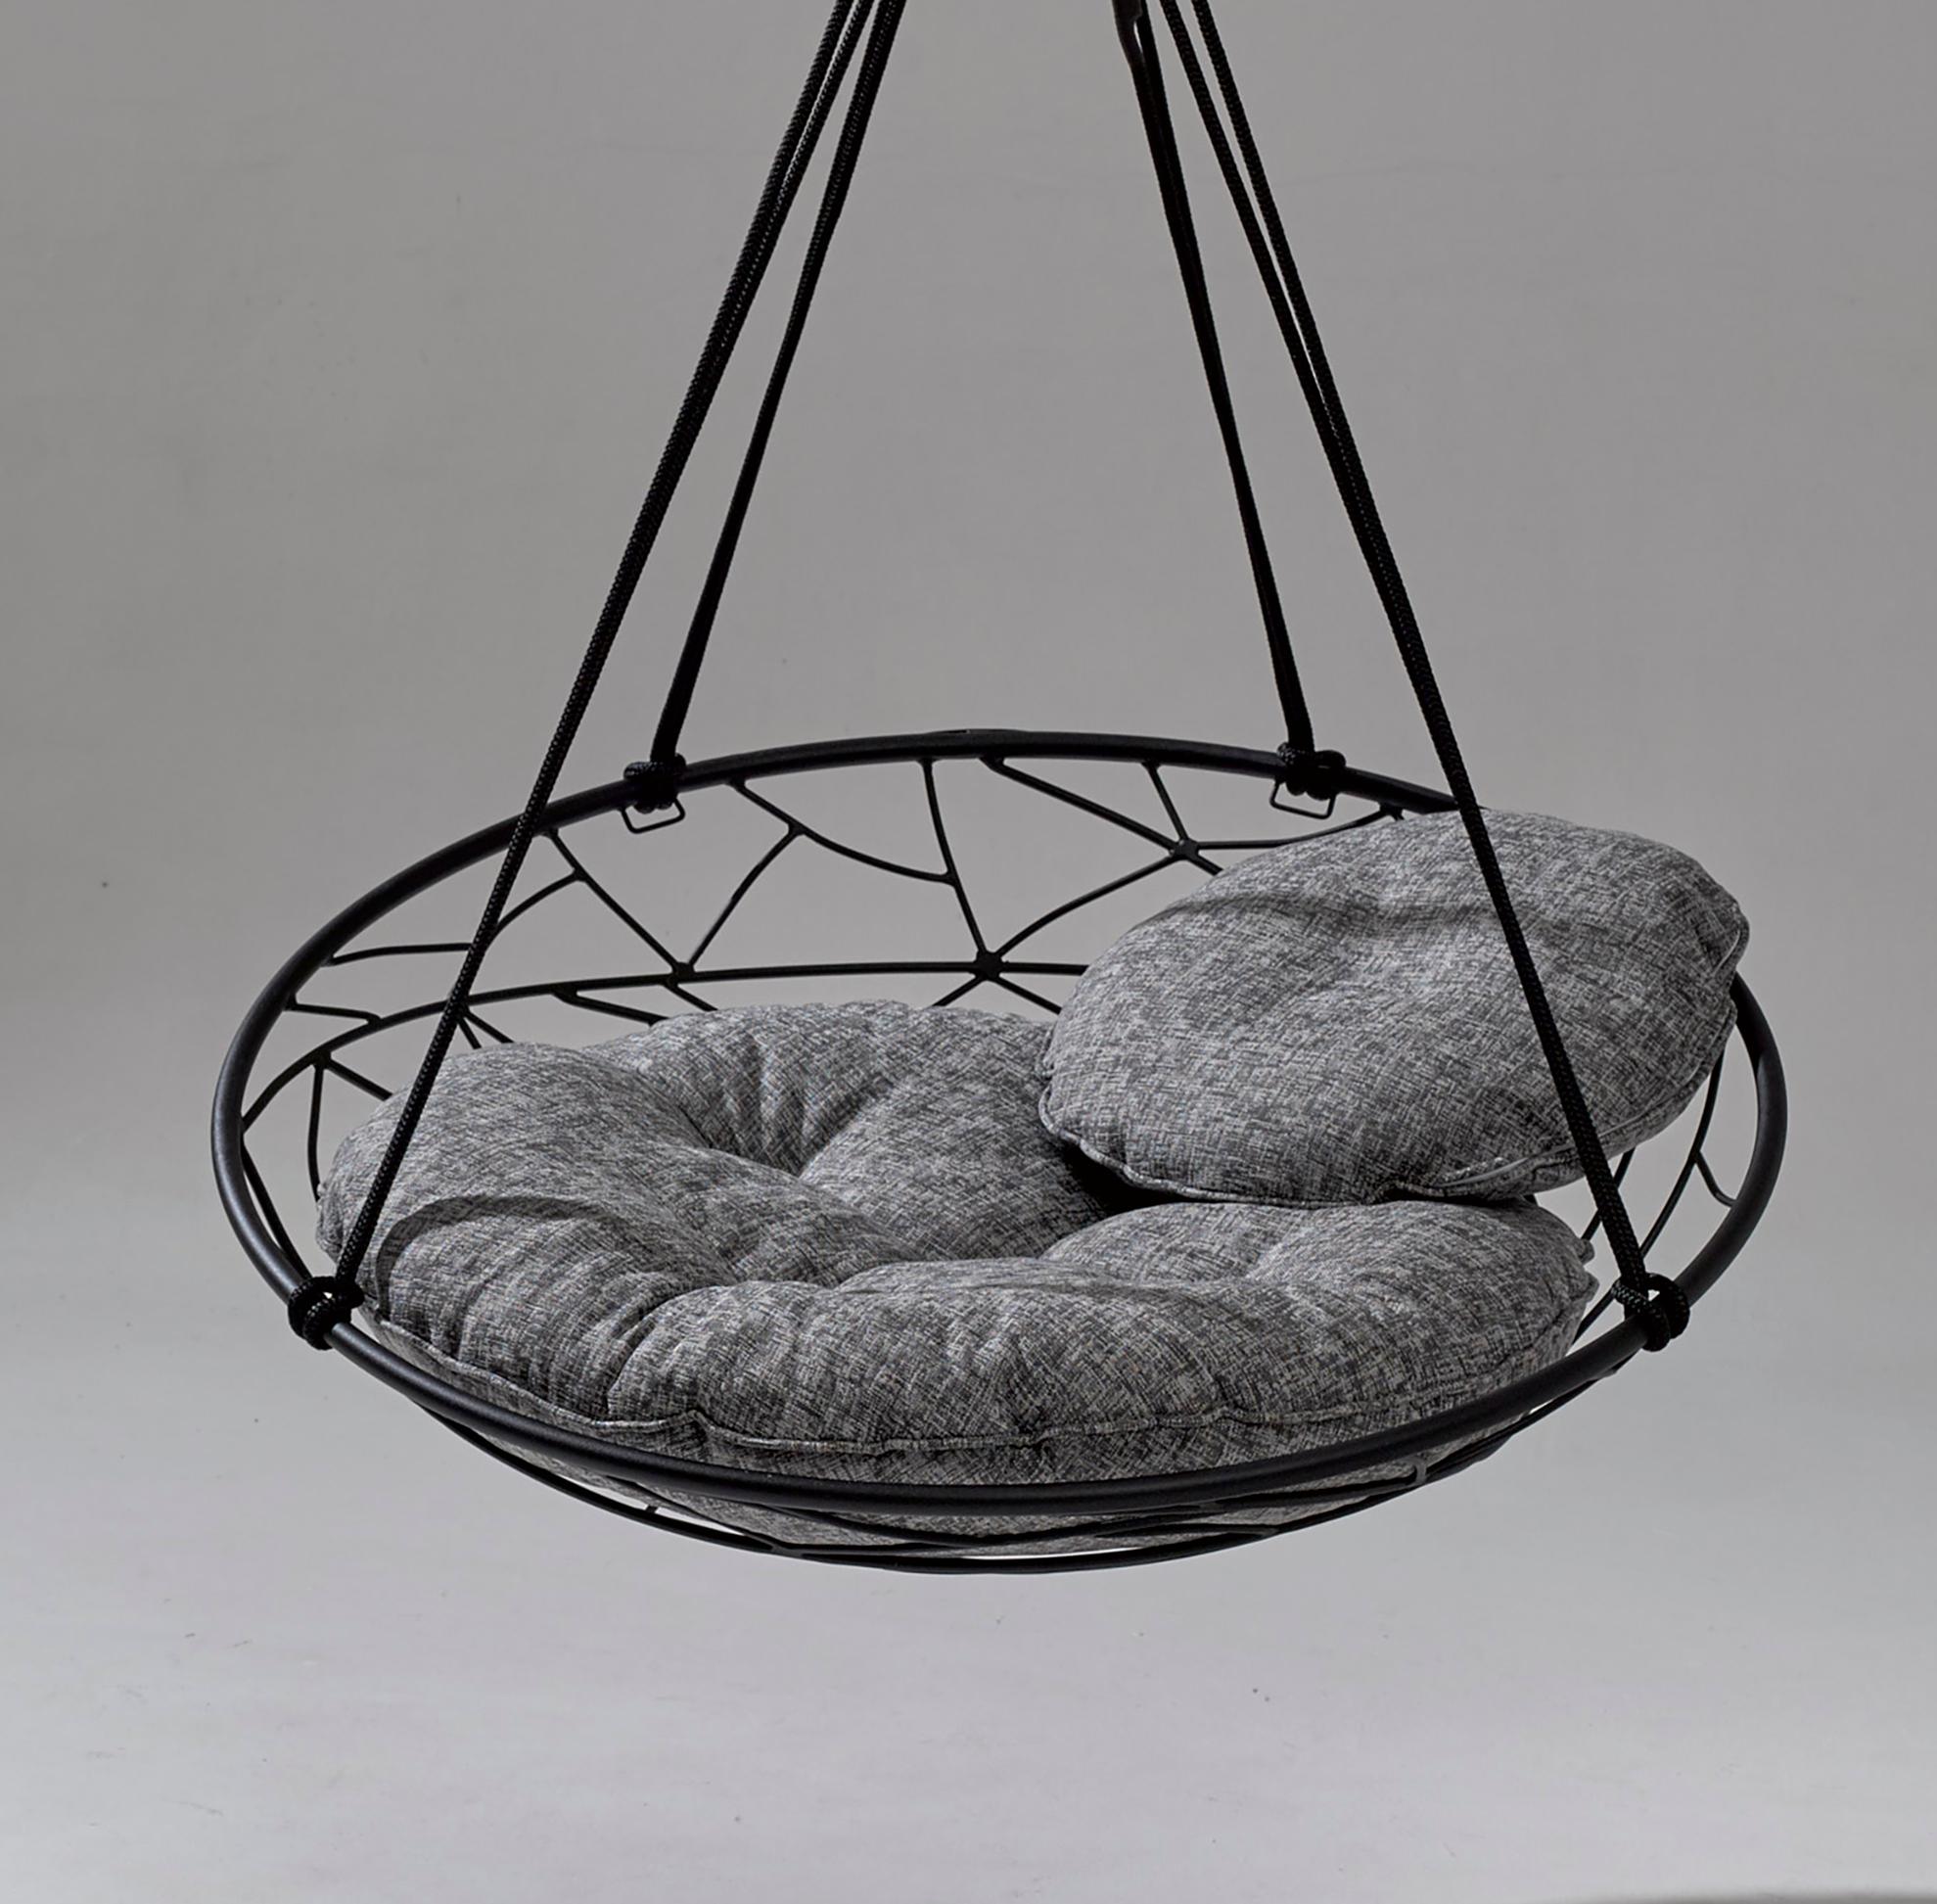 Contemporary Modern Steel Basket Hanging Swing Chair For Sale